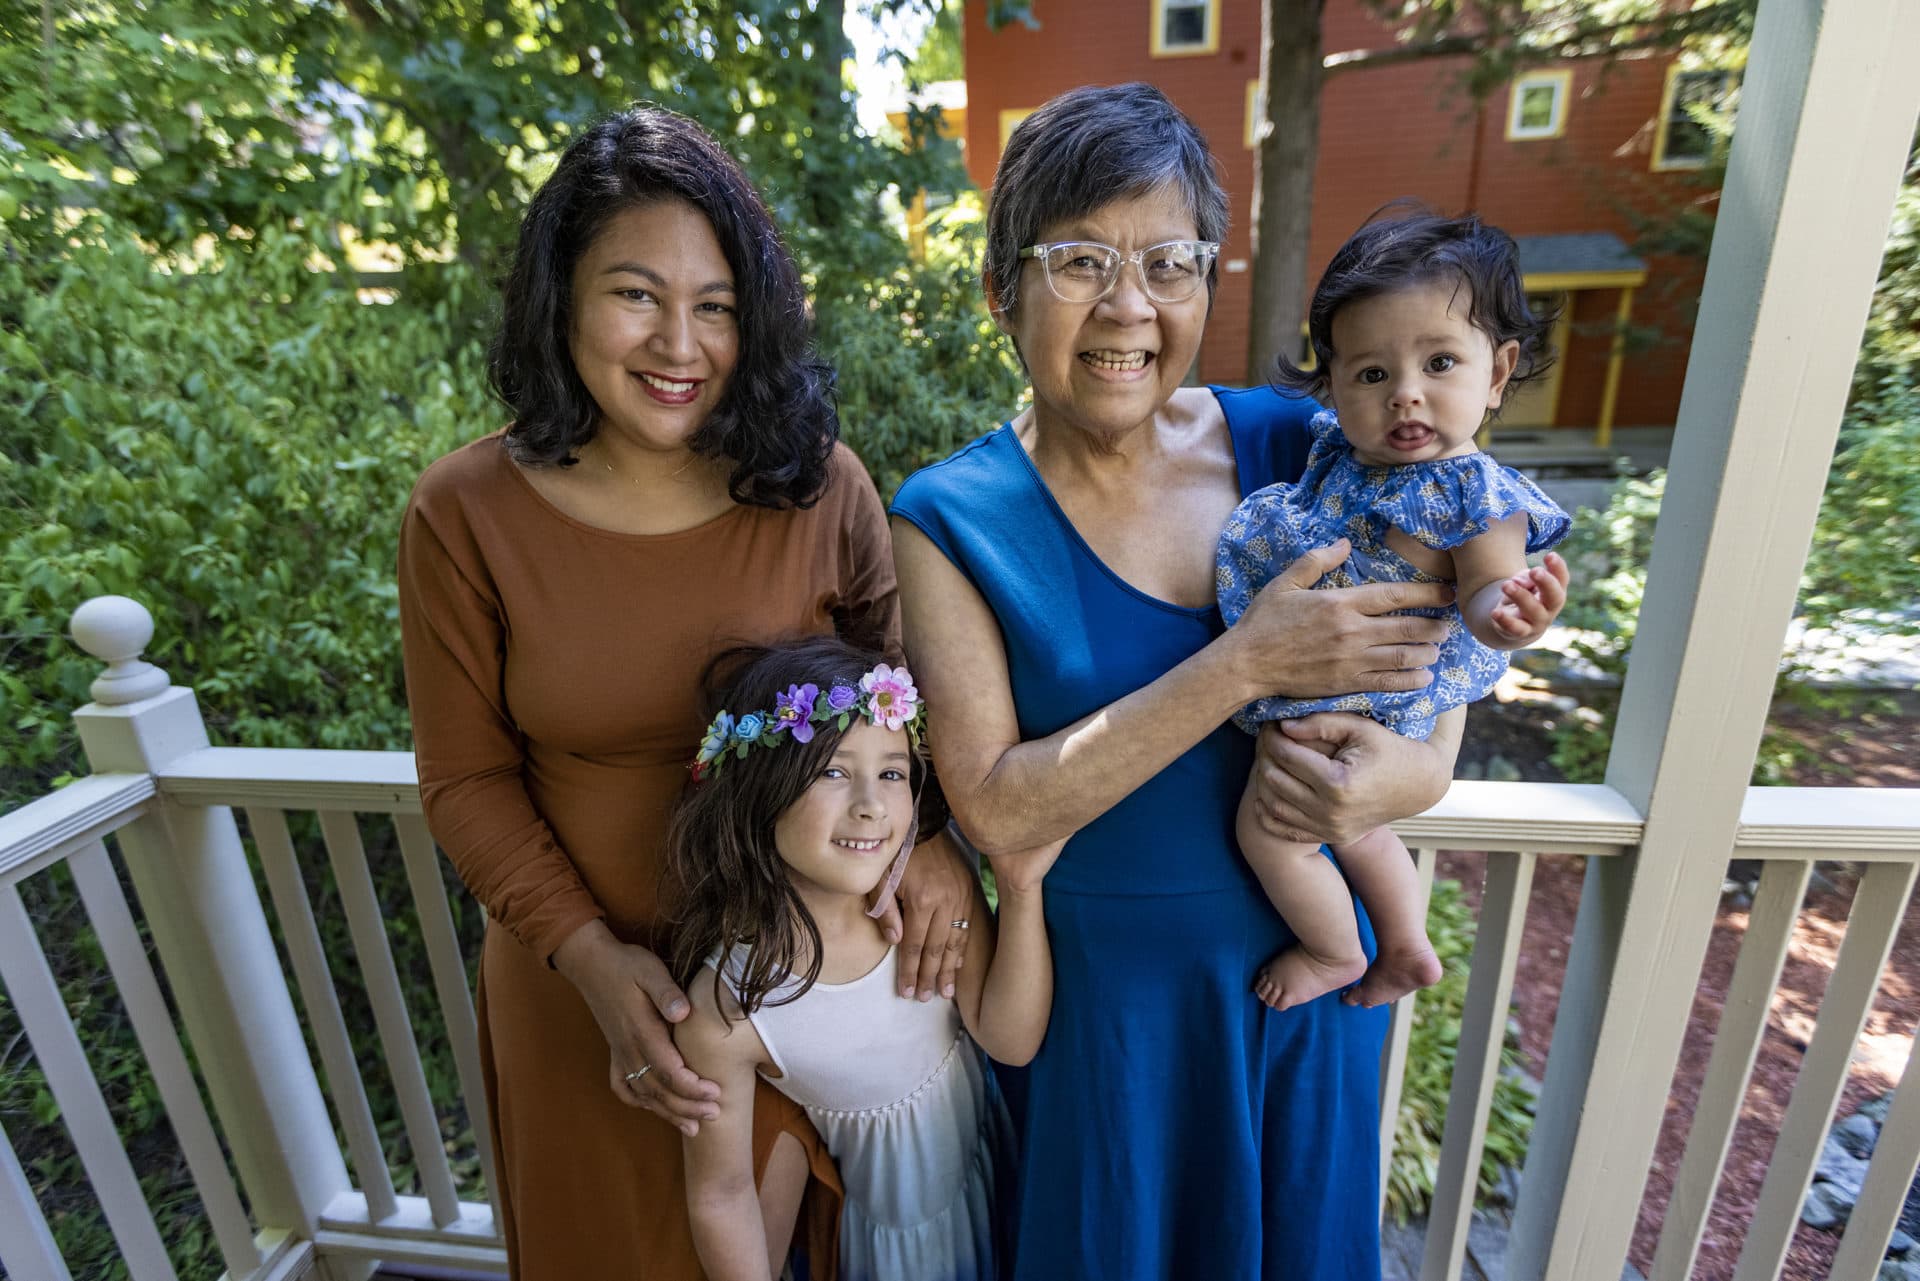 Grace Segran with her daughter Elizabeth and her two children, Lily and Ella. (Jesse Costa/WBUR)